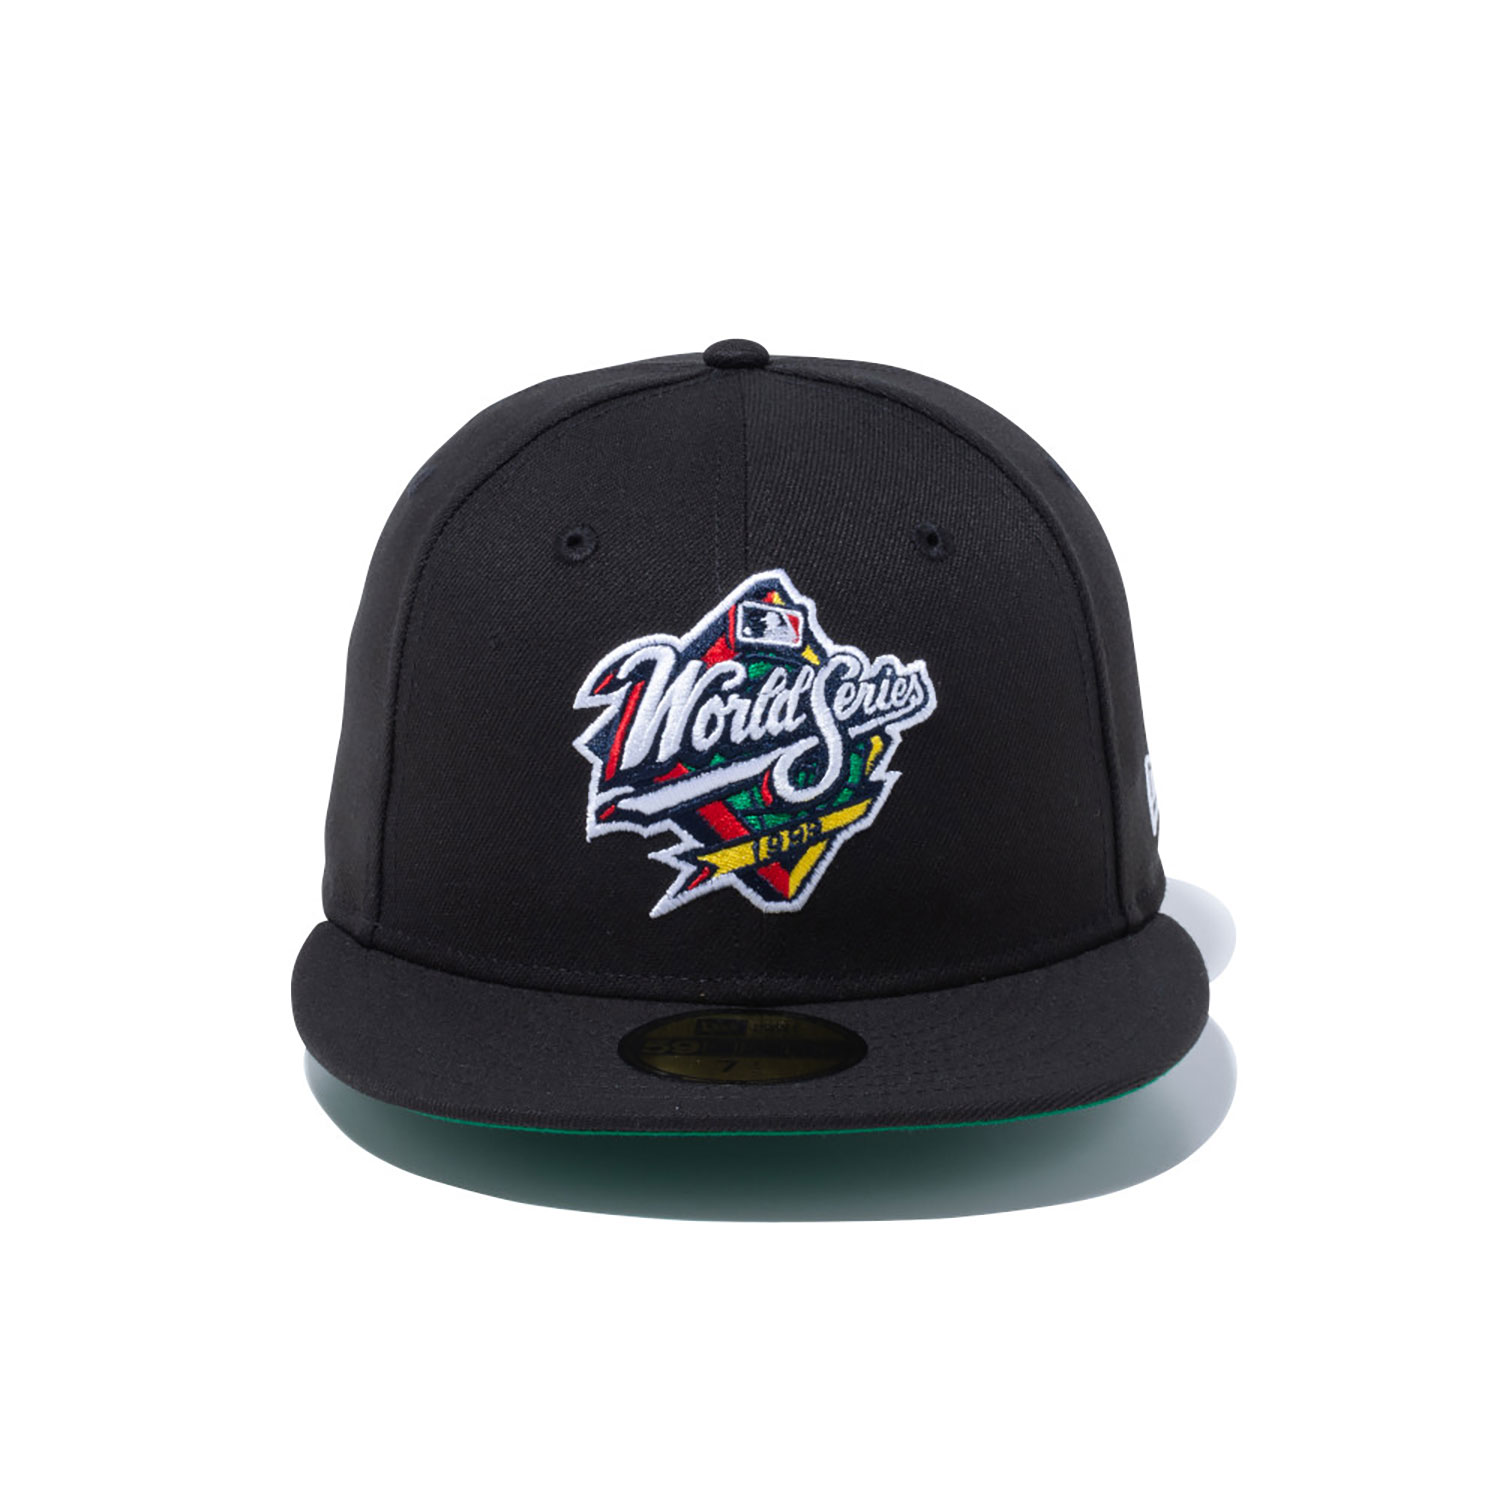 MLB World Series New Era Japan Black 59FIFTY Fitted Cap